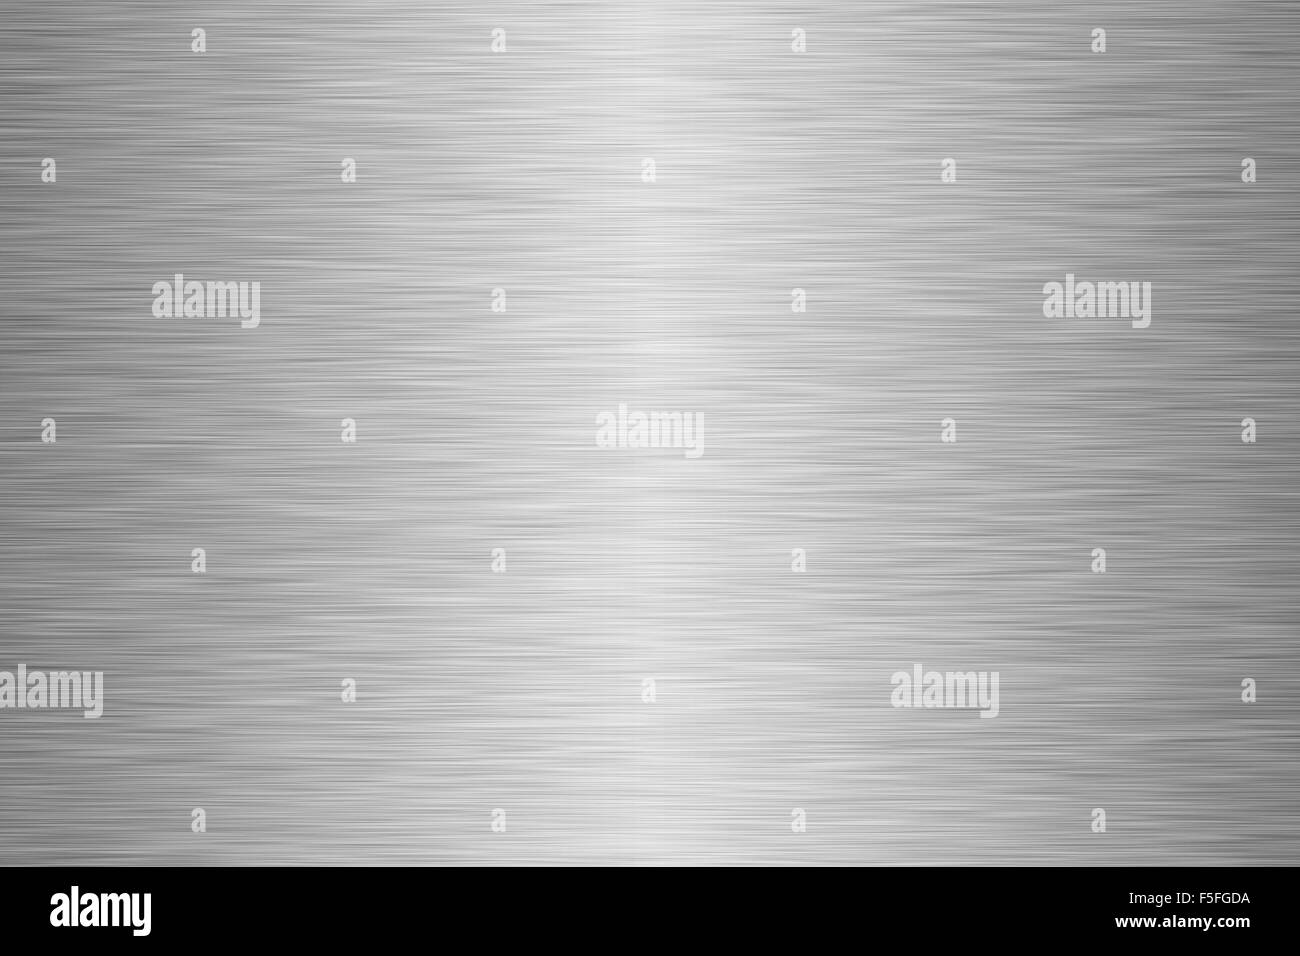 Steel textures Black and White Stock Photos & Images - Alamy